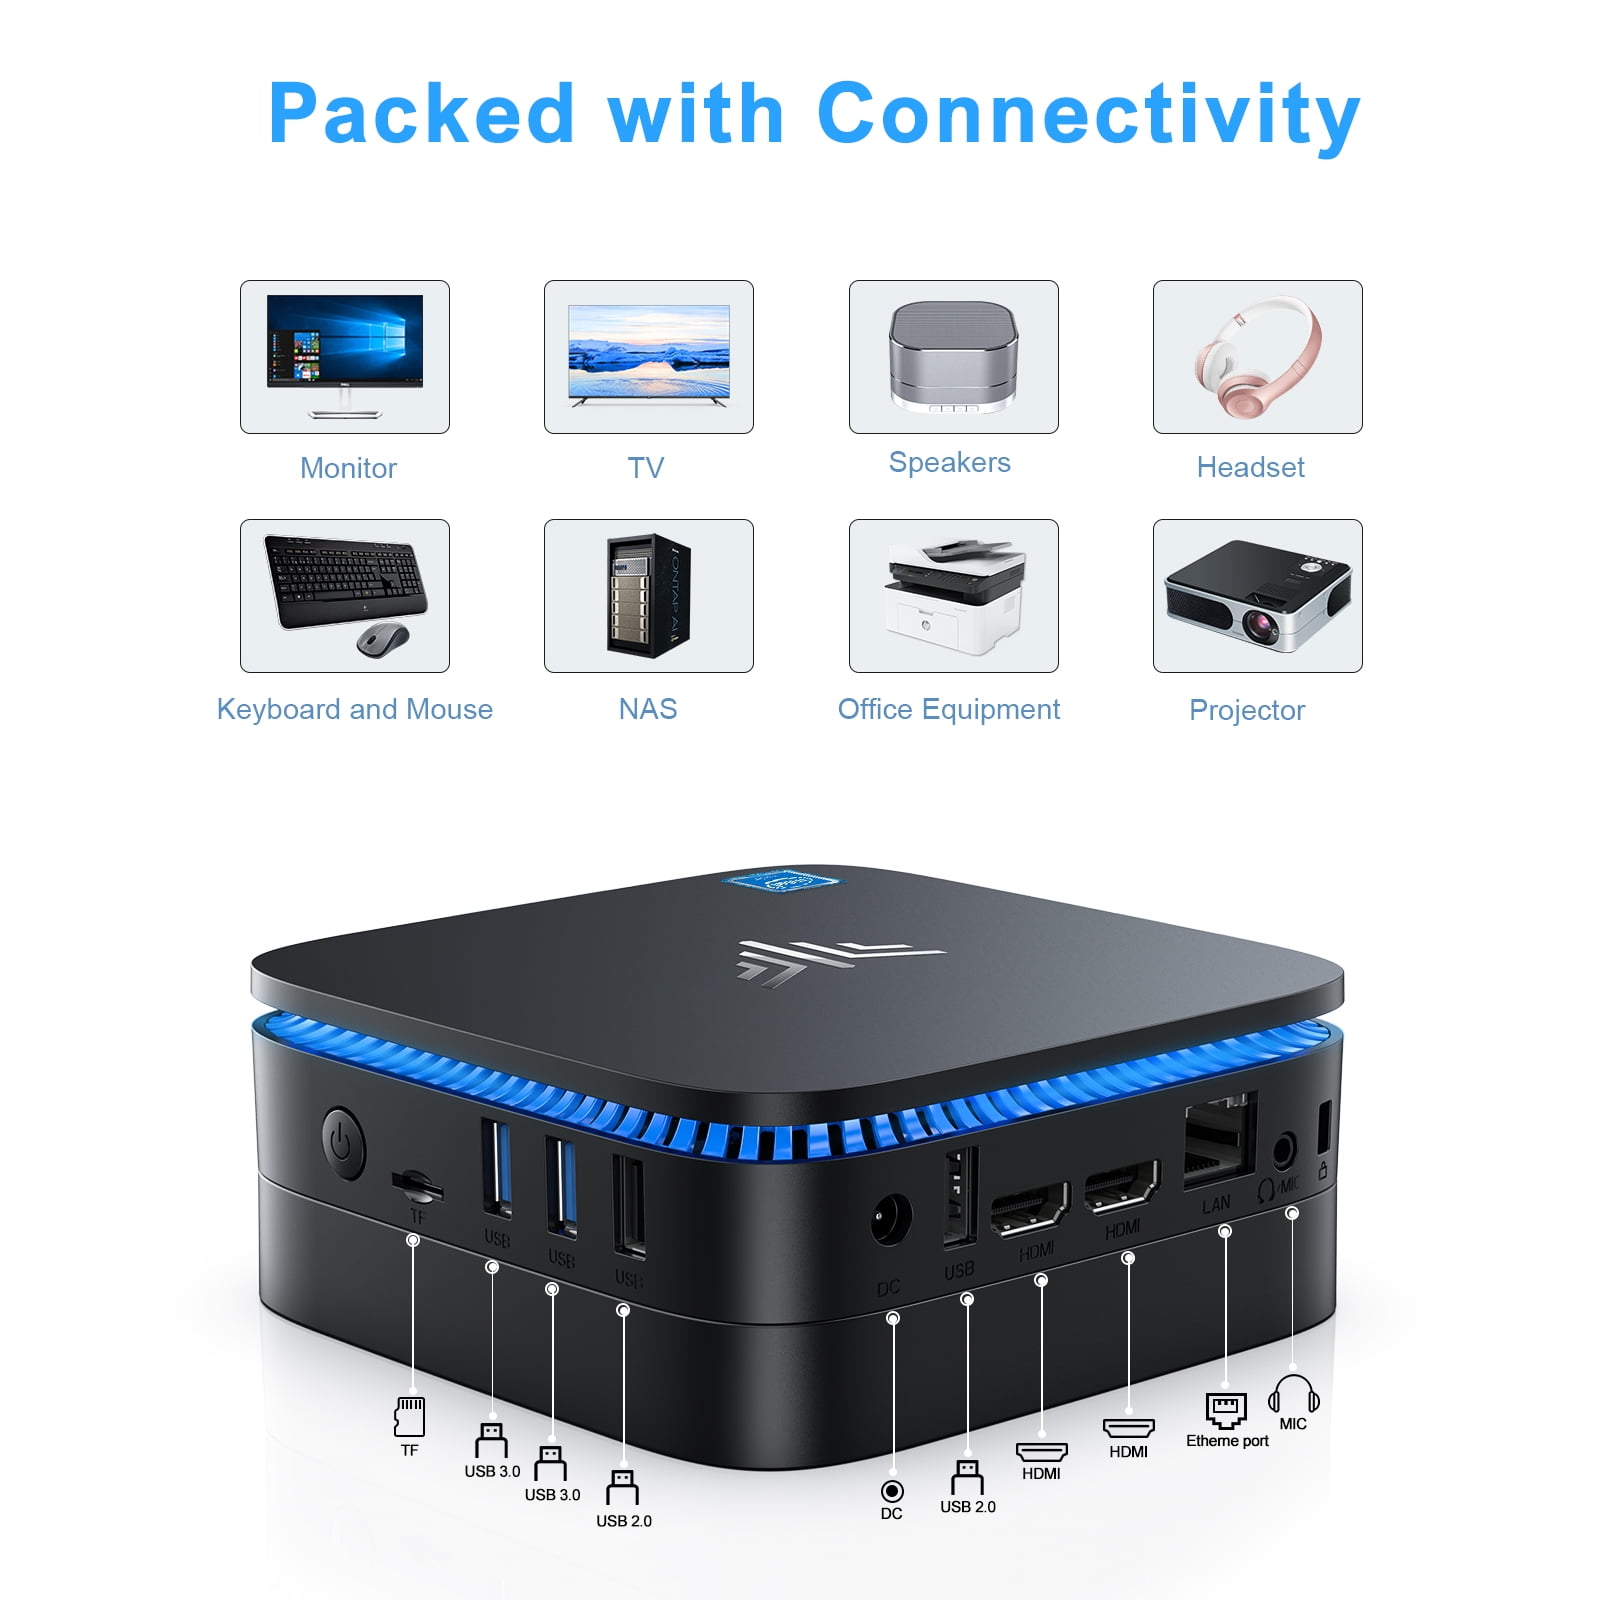 5G WiFi/Gigabit Ethernet/BT 4.2 Small Form Factor Computer For Office/Remote Work/Home Theater Supports 4K HD Dual Screen/2.4G KAMRUI Mini PC,Windows 10 pro 8GB RAM 256GB SSD Micro Desktop Computers 